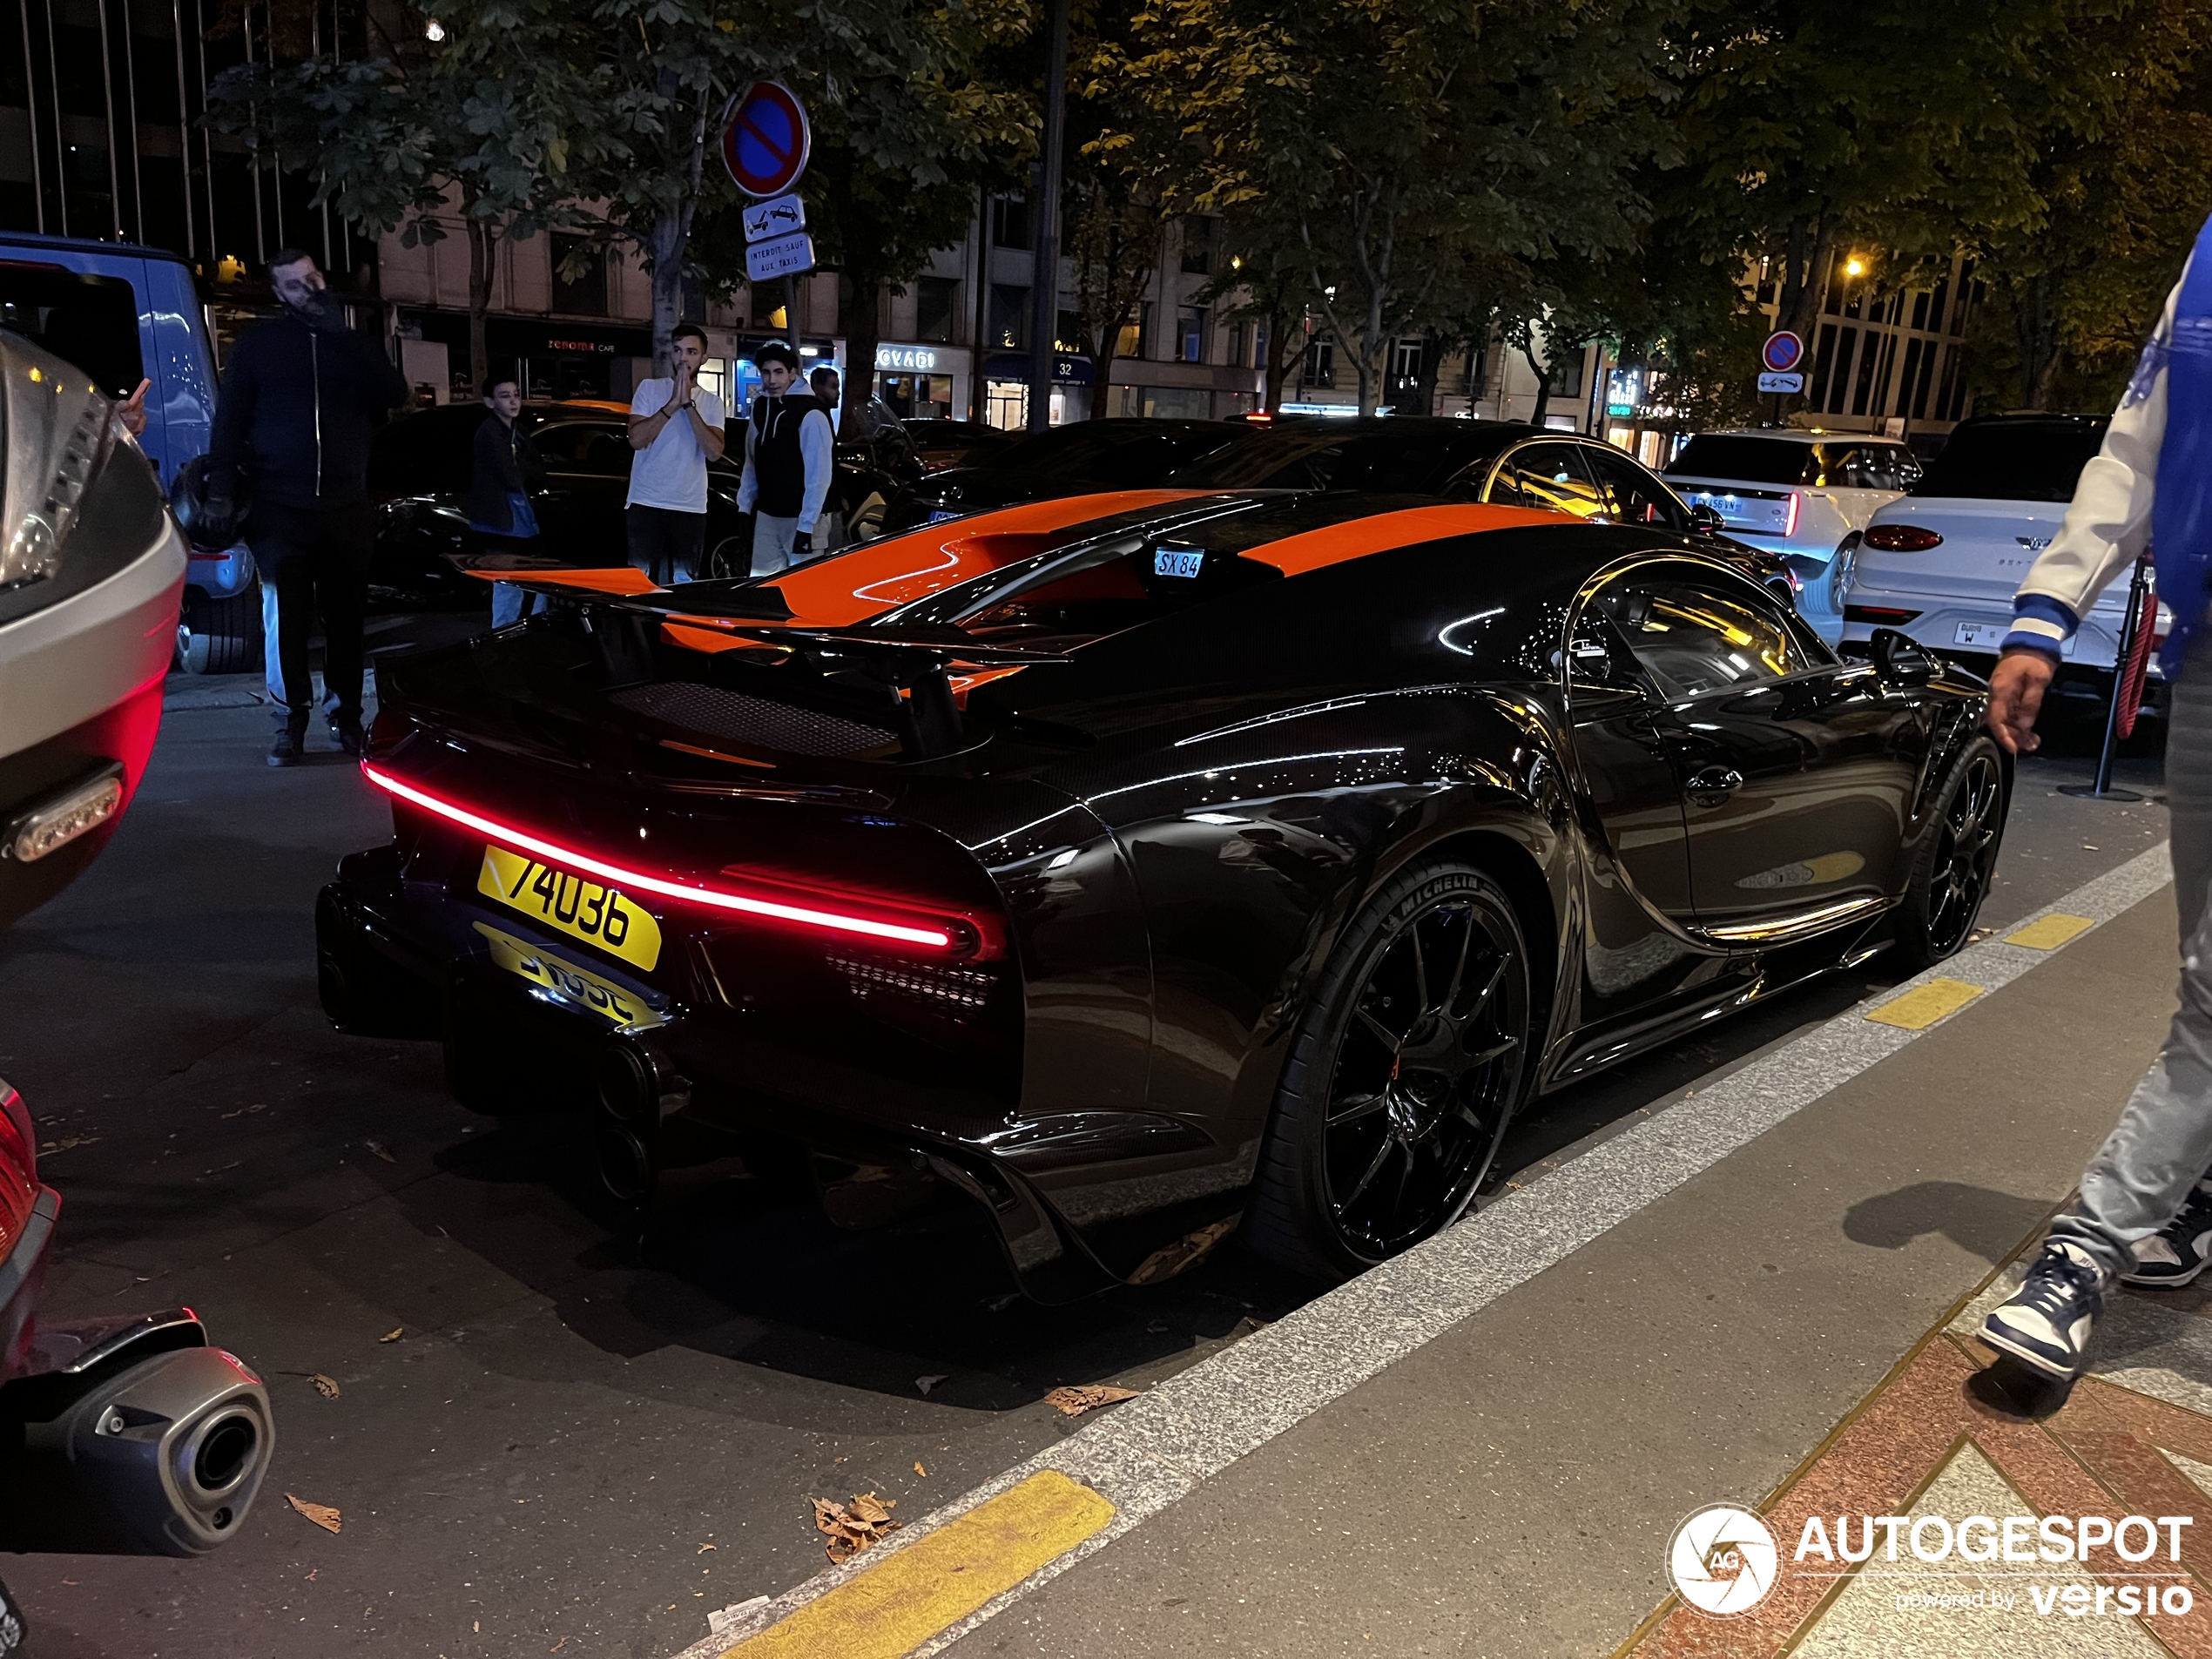 A new Chiron Super Sport 300+ shows up in Paris